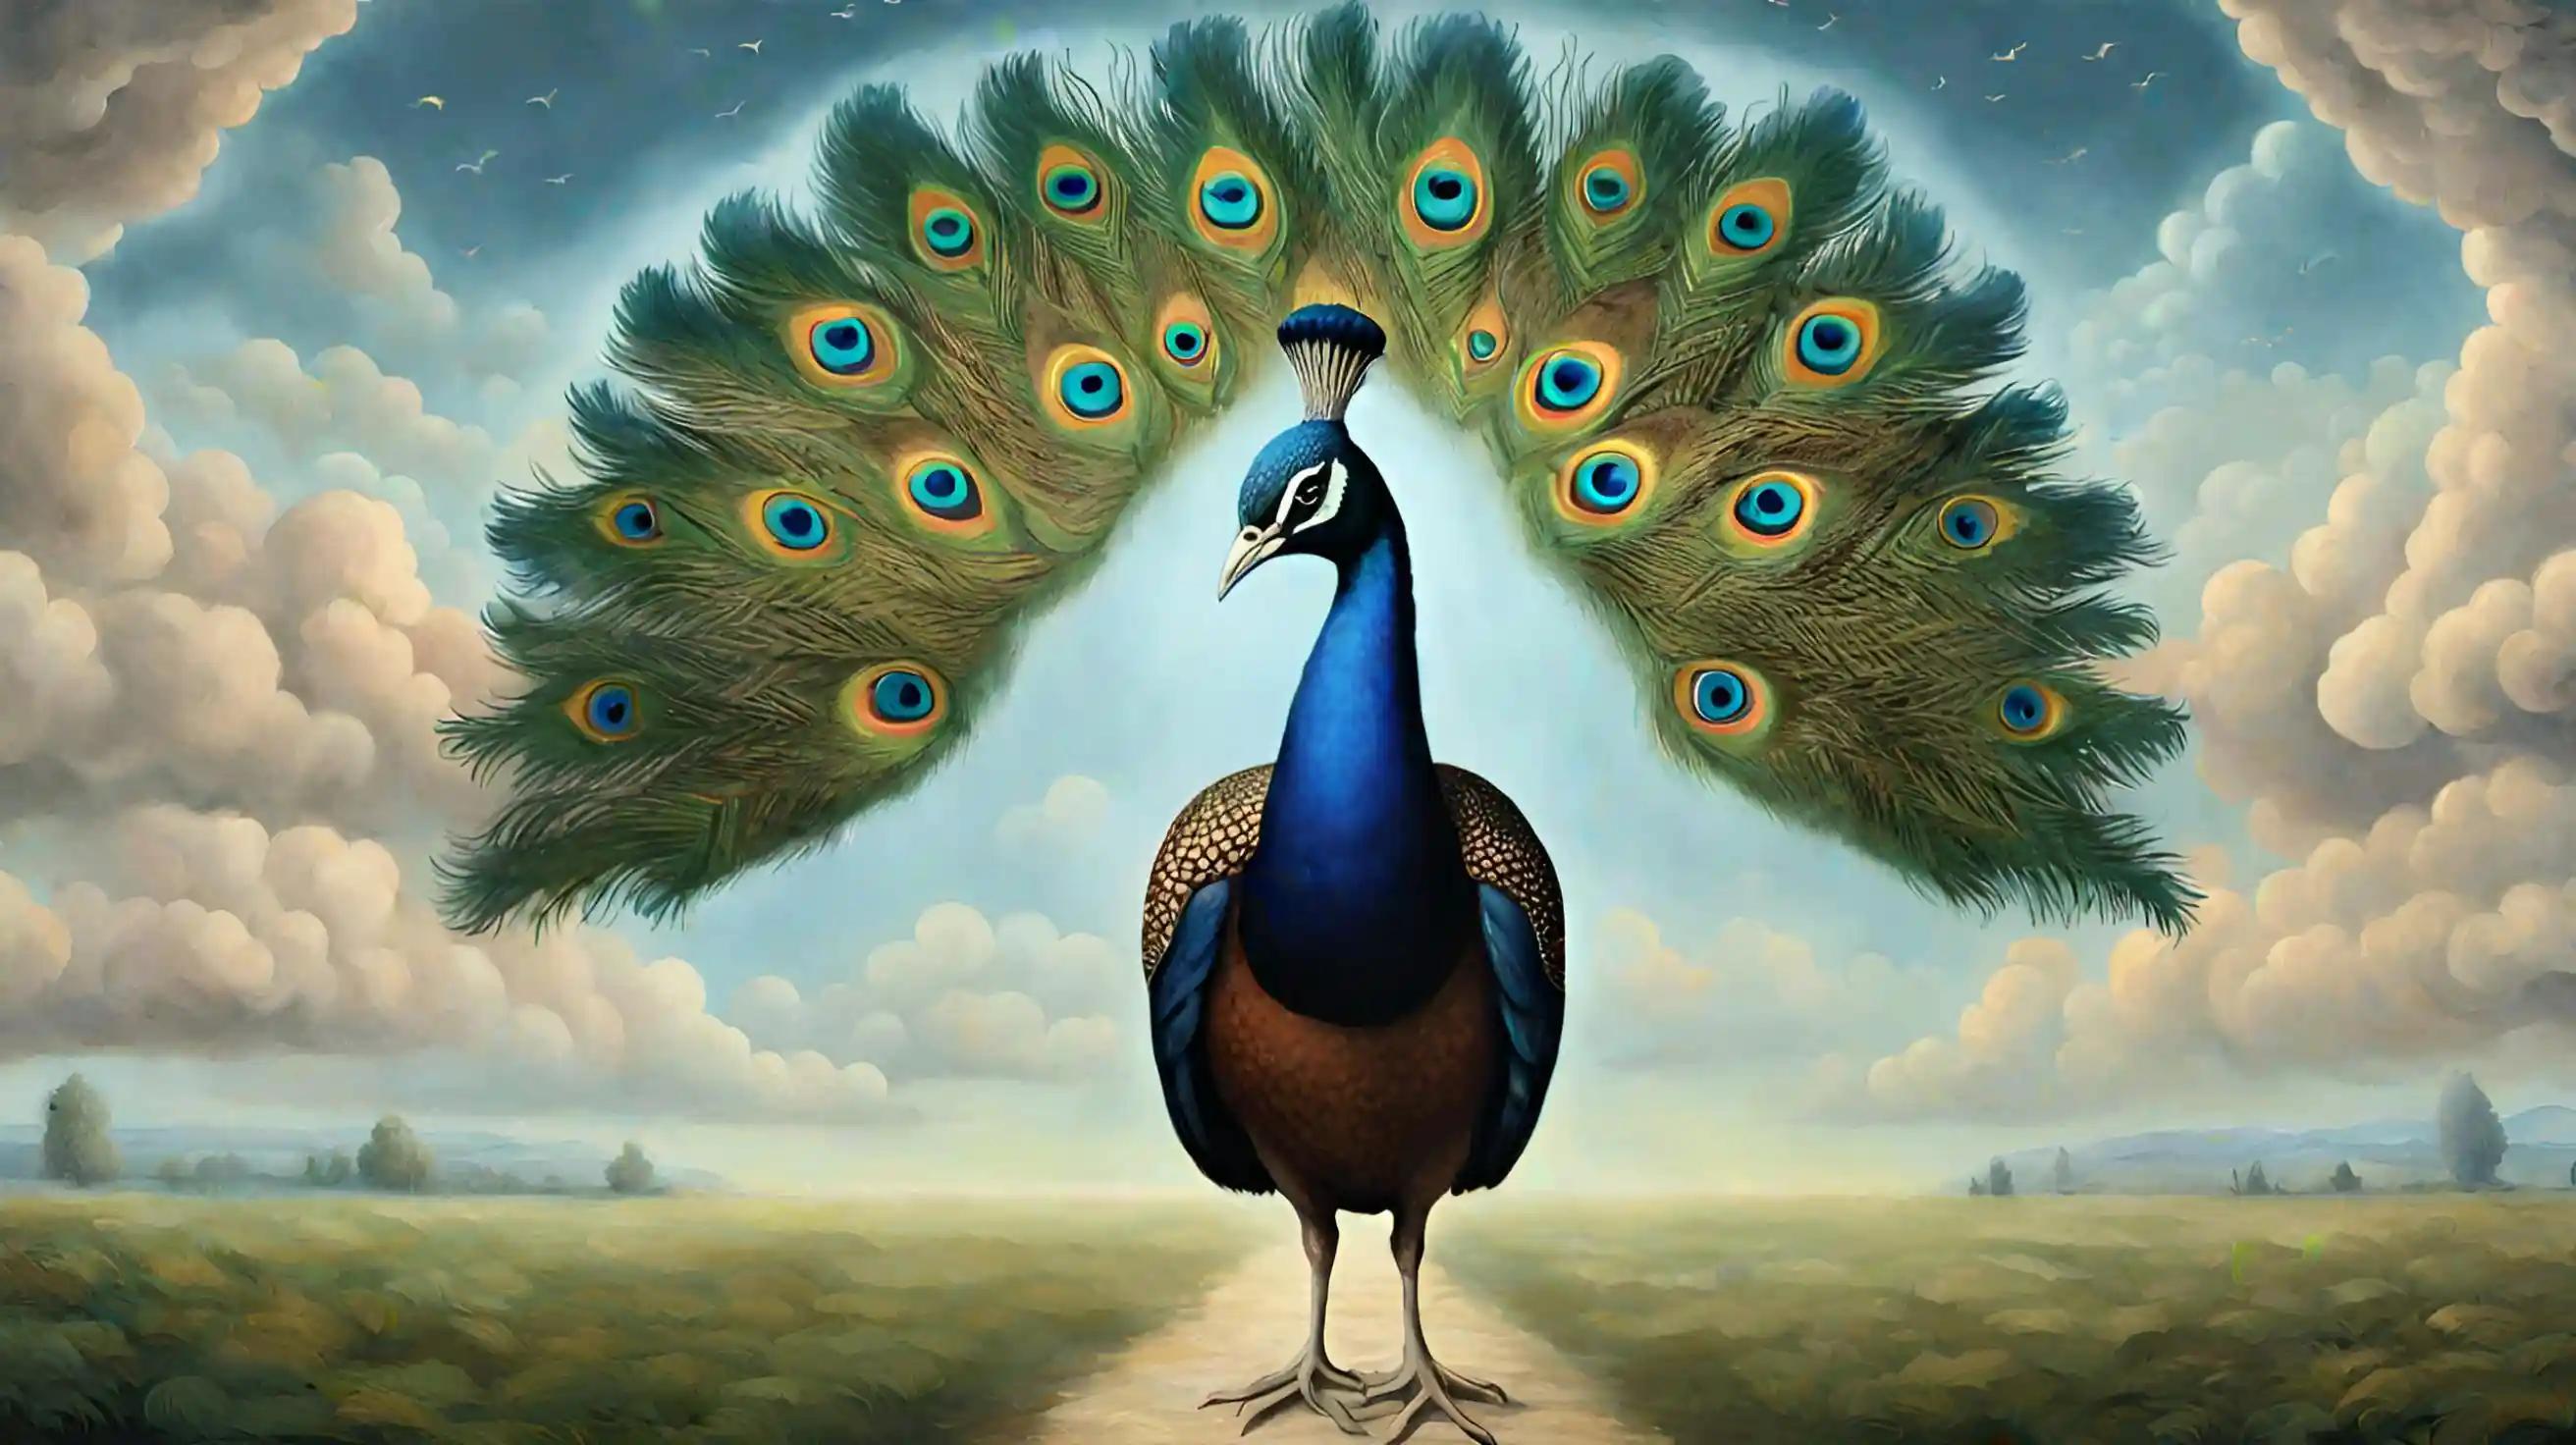 Different Peacock Dream Meanings & Symbolism